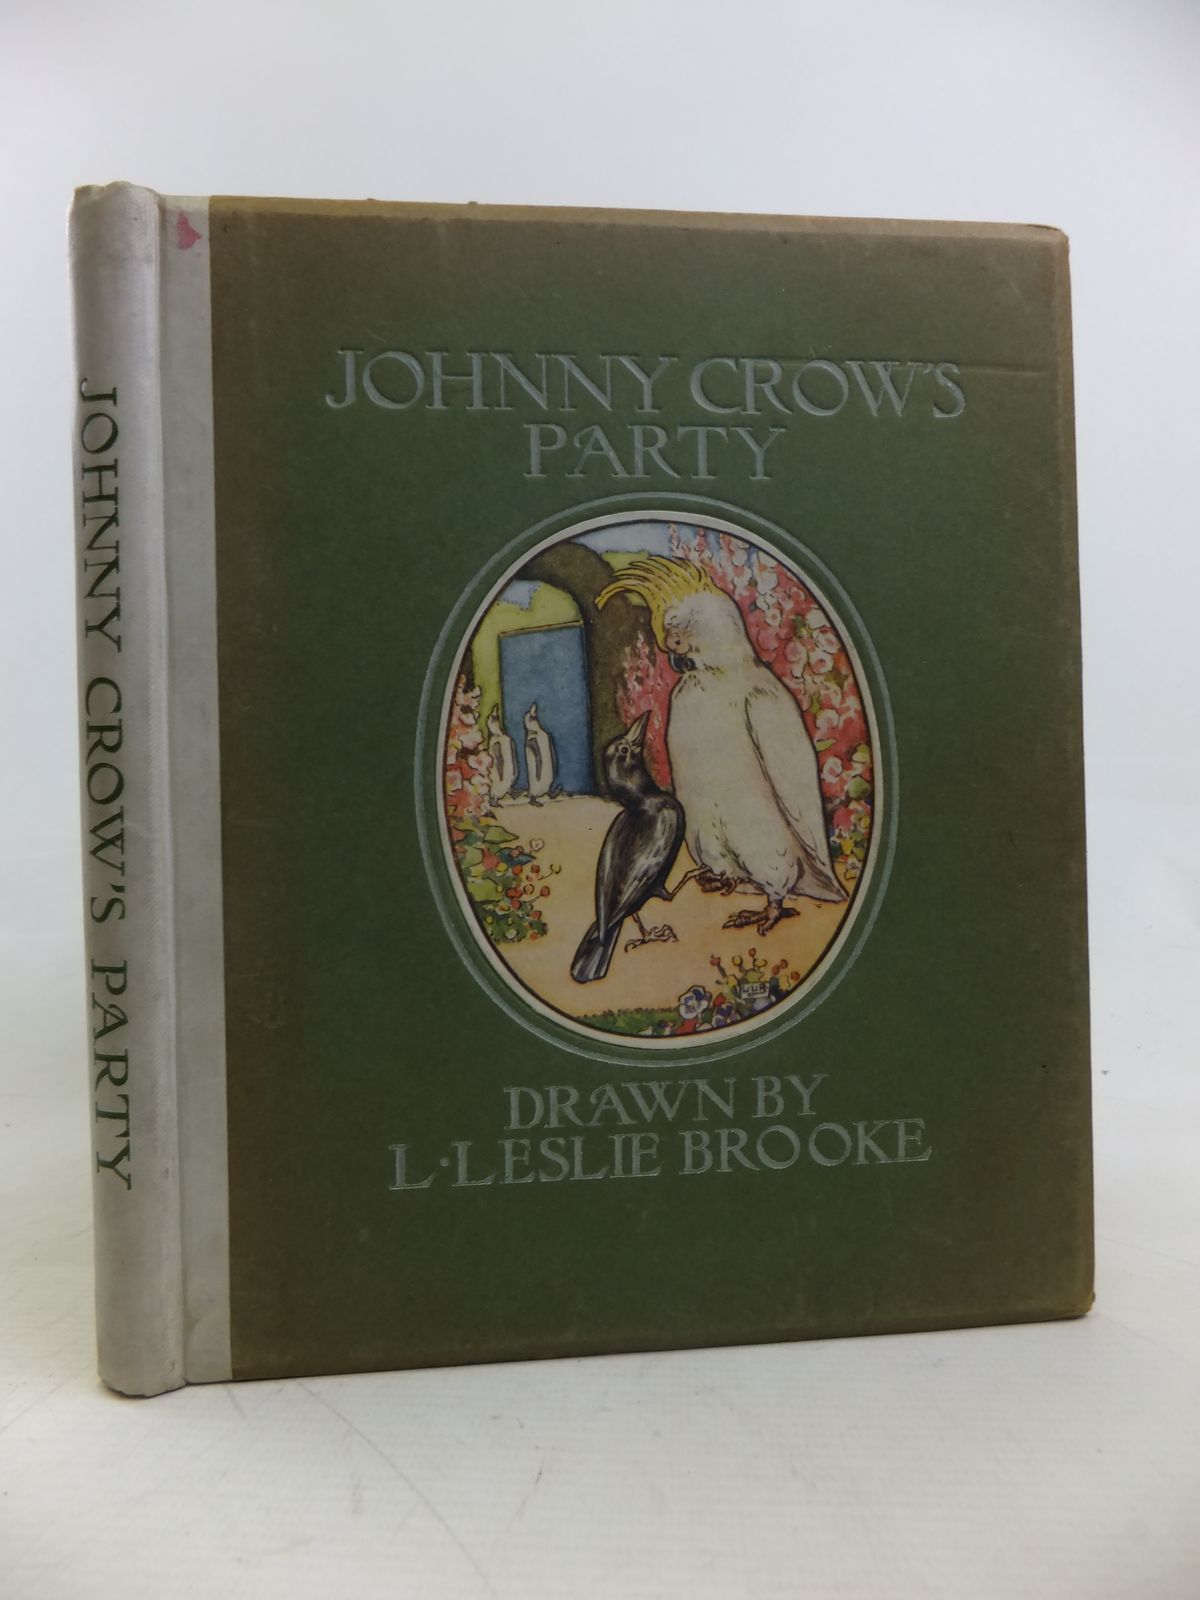 Photo of JOHNNY CROW'S PARTY written by Brooke, L. Leslie illustrated by Brooke, L. Leslie published by Frederick Warne & Co Ltd. (STOCK CODE: 2116785)  for sale by Stella & Rose's Books